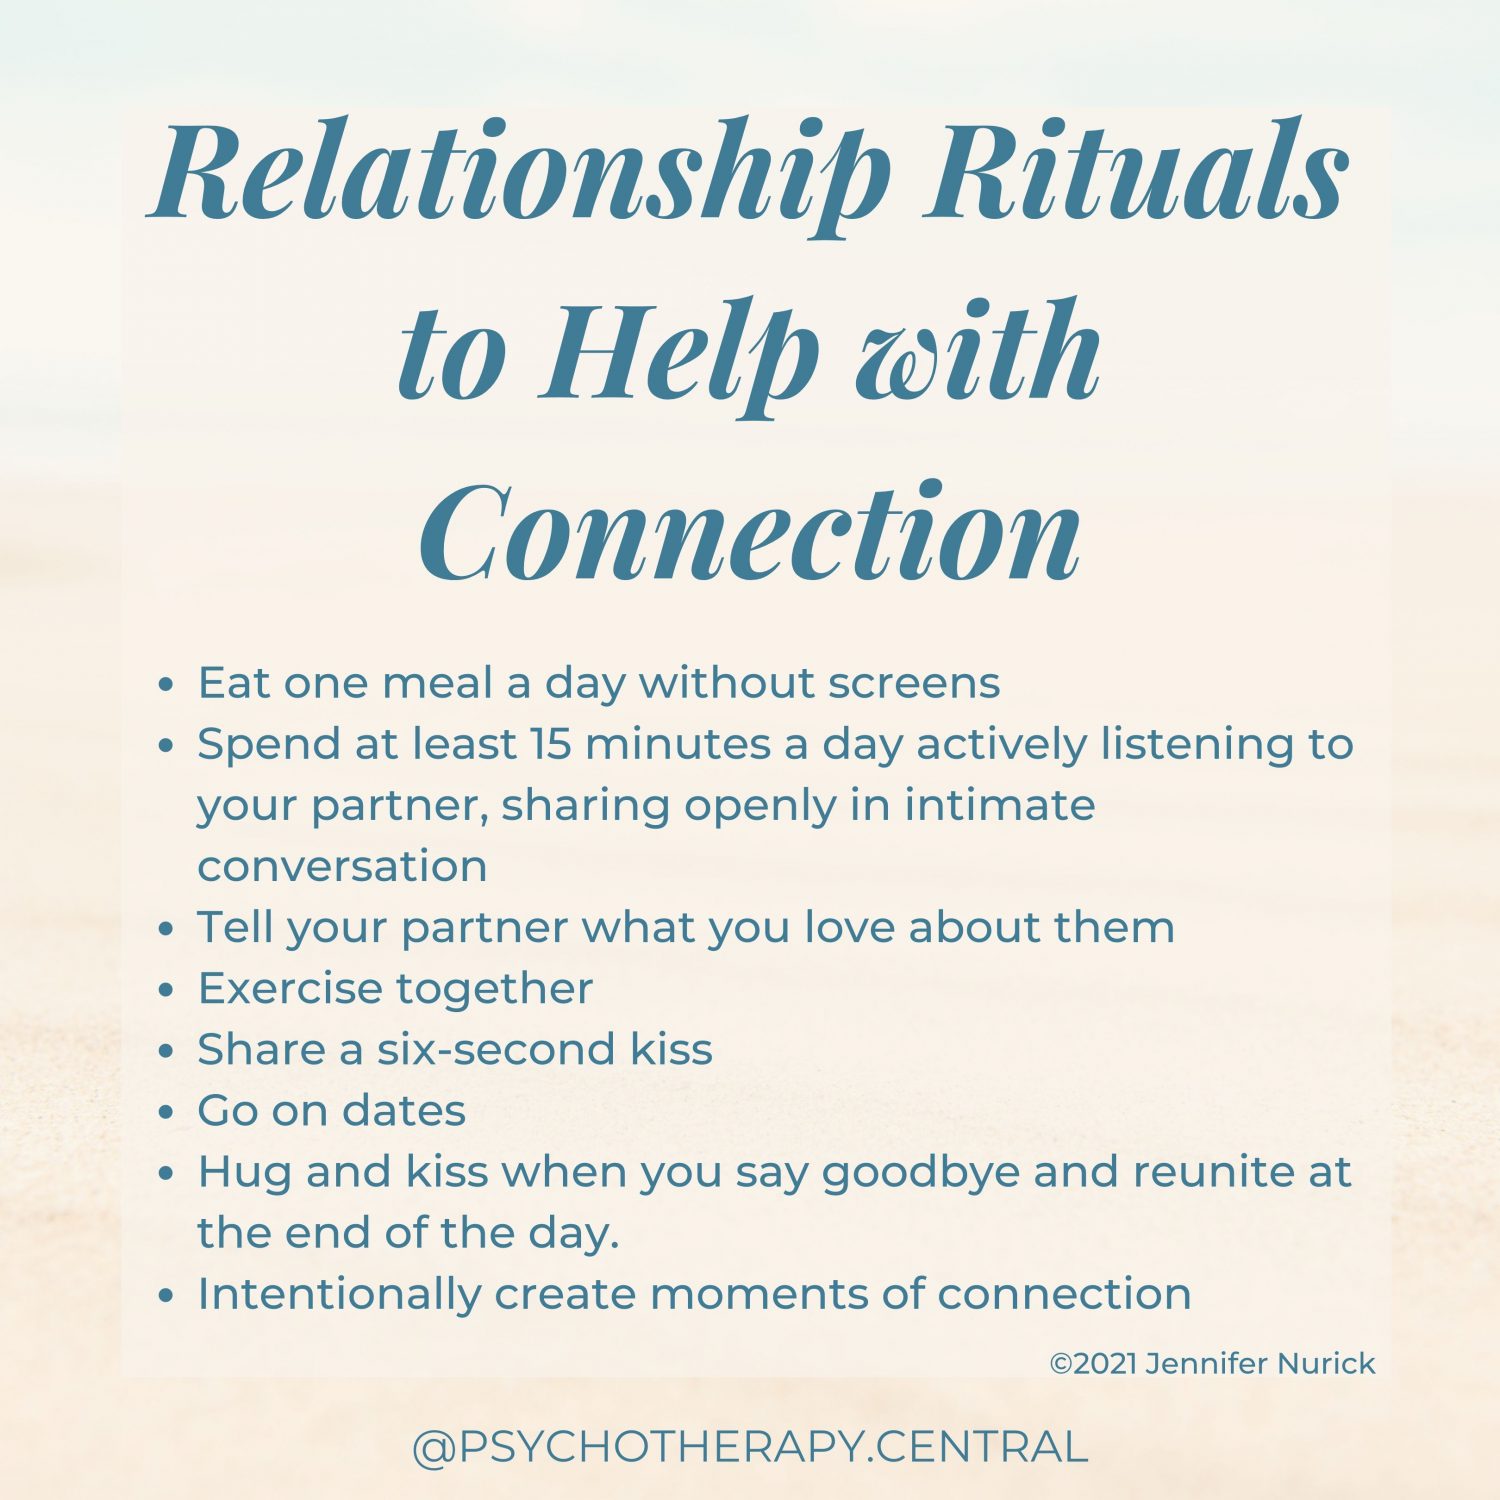 Relationship Rituals to Help with Connection Eat one meal a day without screens Spend at least 15 minutes a day actively listening to your partner, sharing openly in intimate conversation. Tell your partner what you love about them Exercise together Share a six-second kiss Go on dates Hug and kiss when you say goodbye and reunite at the end of the day. Intentionally create moments of connection